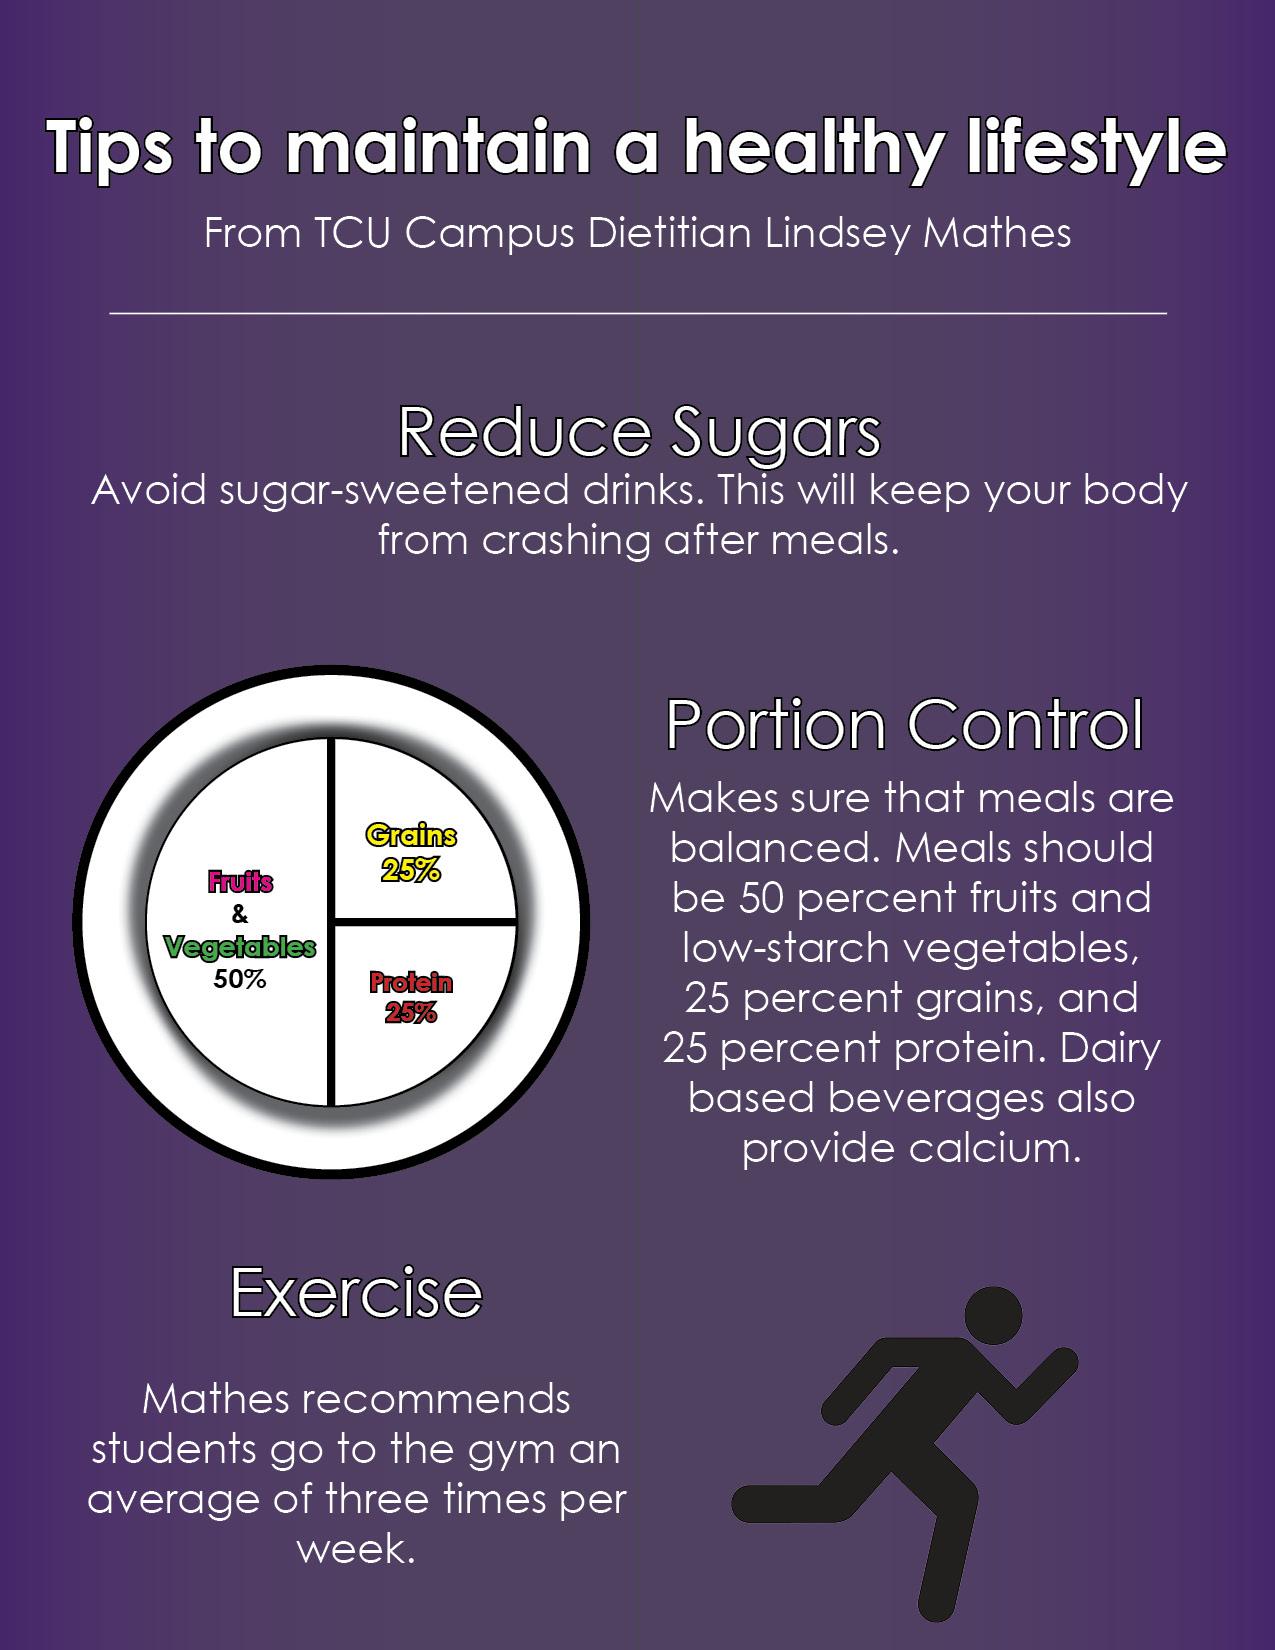 TCU Campus Dietitian Lindsey Mathes says these three tips will help college students to maintain a healthy lifestyle during their time at TCU. 